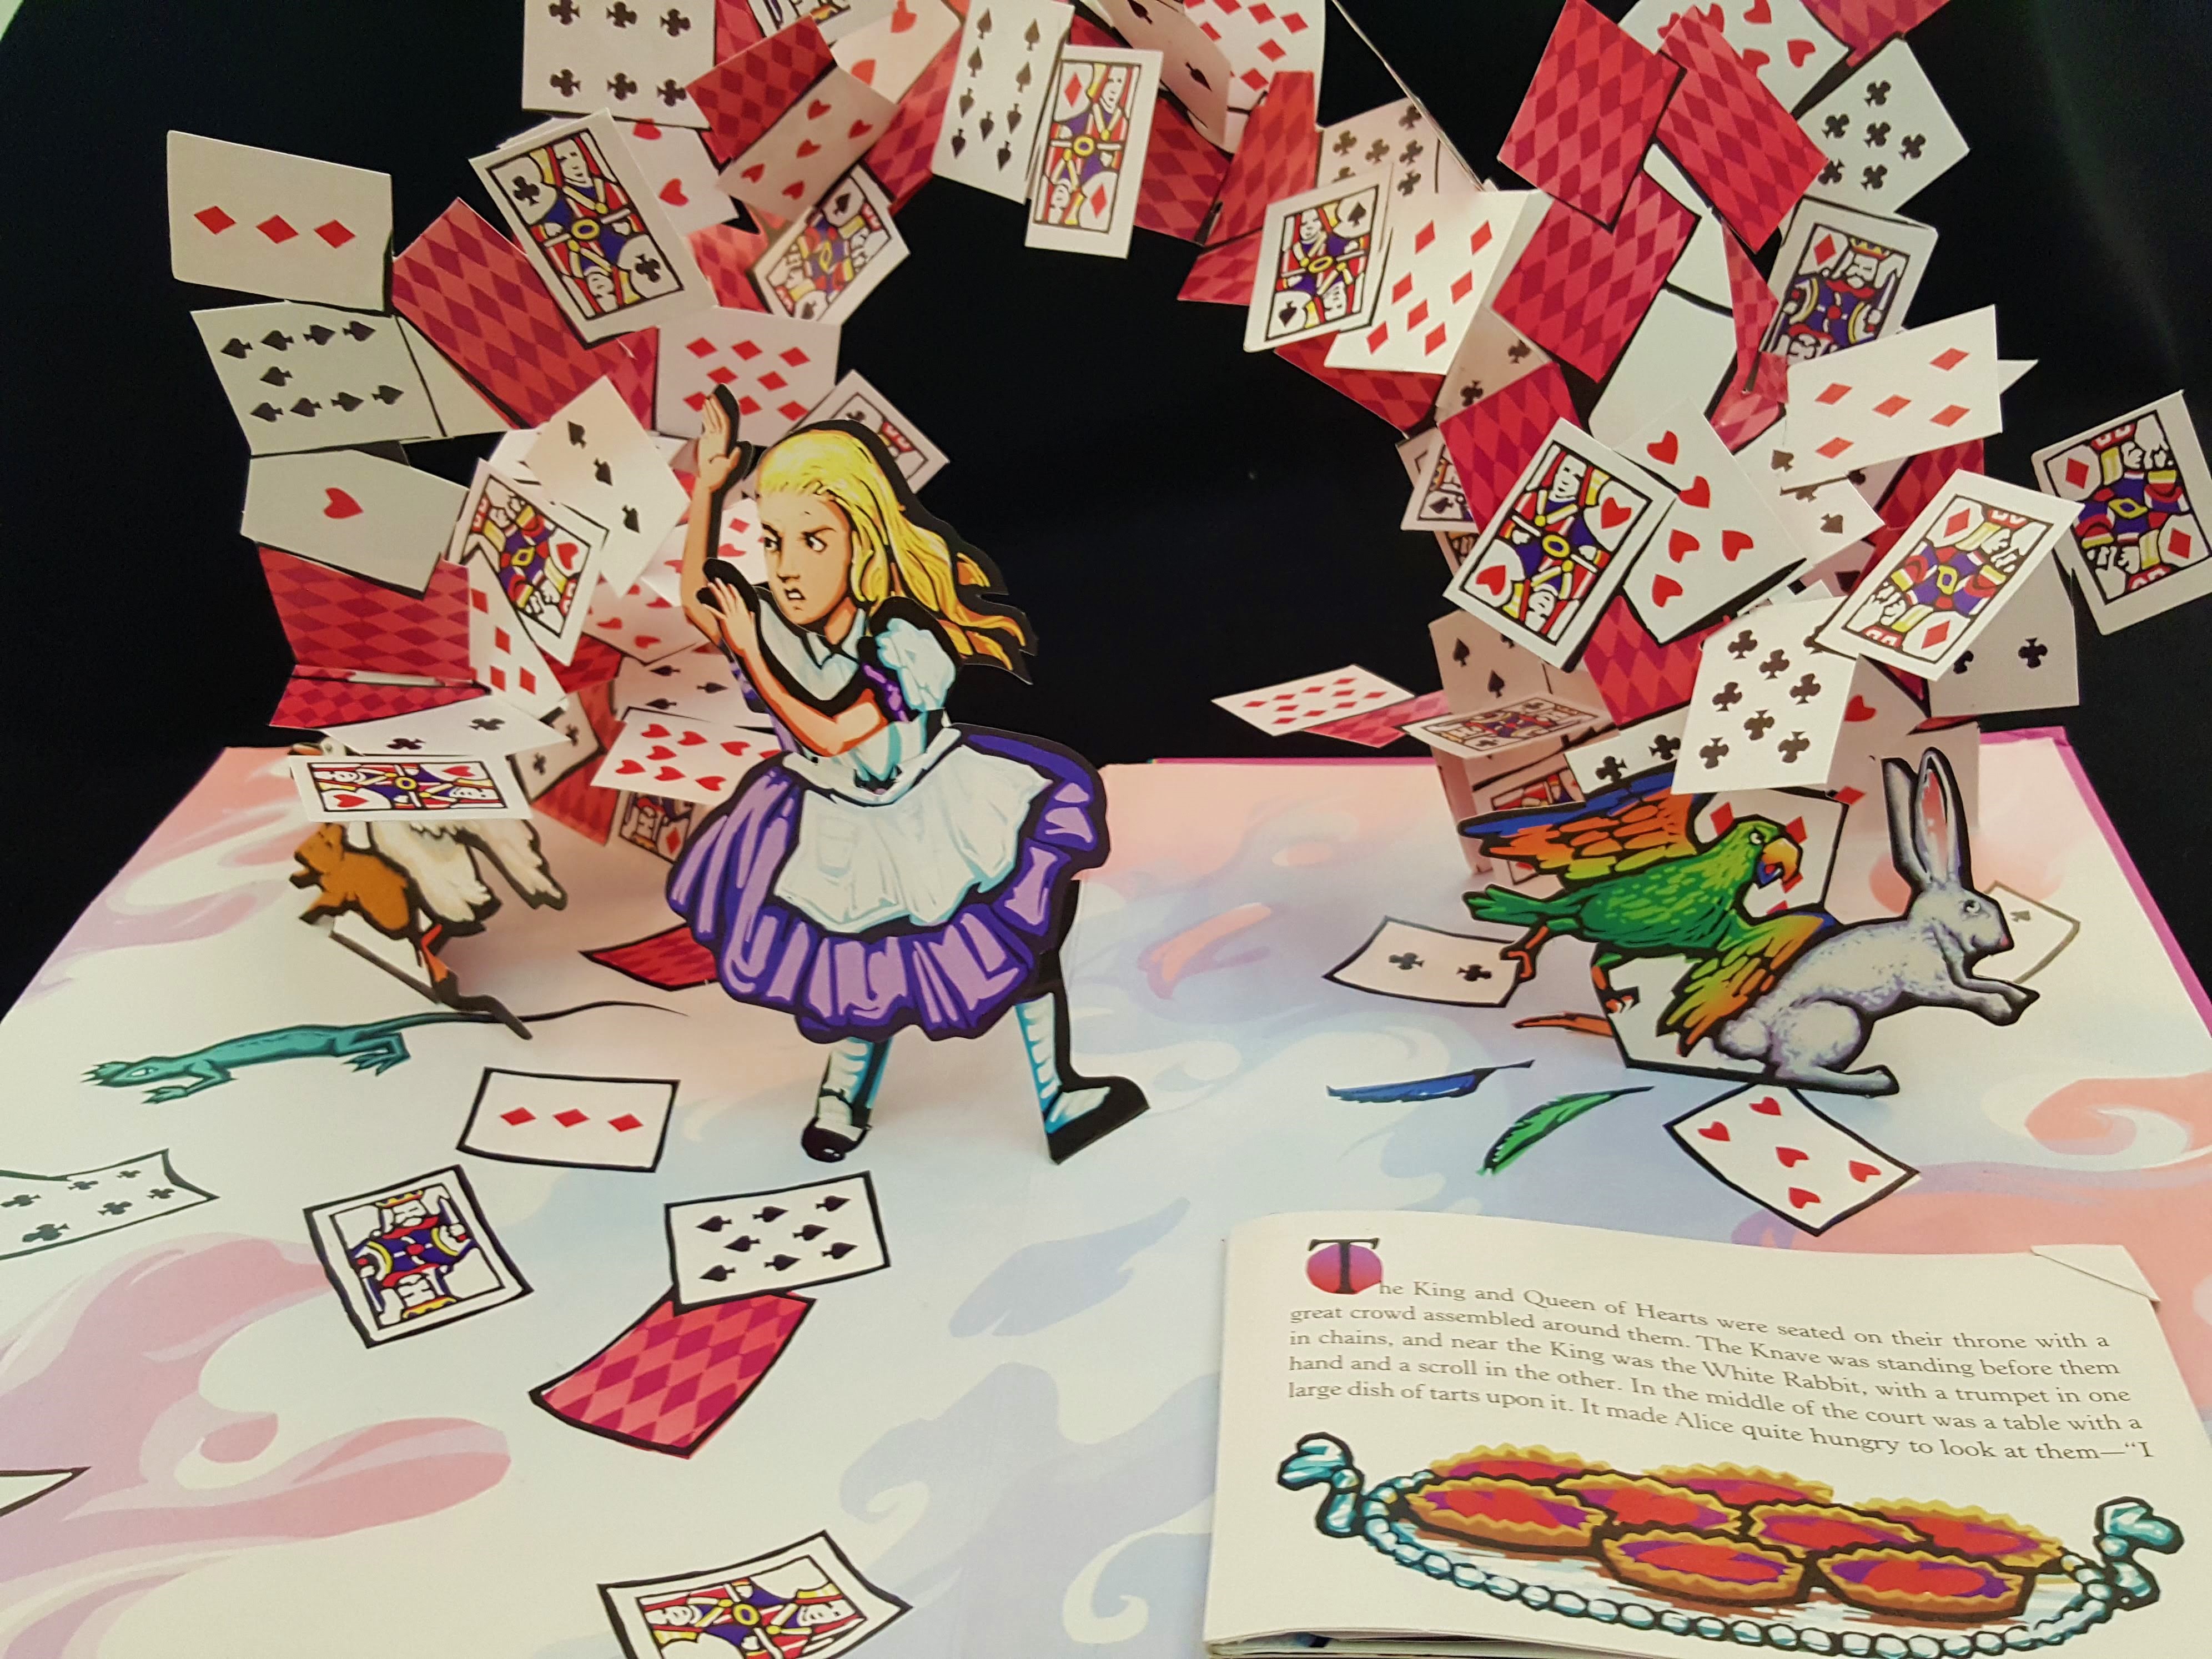 Image shows a page spread from the pop-up book, Alice's Adventures in Wonderland. On a colorful ground, an arch of playing cards looms over a small girl with blonde hair in a purple-blue dress. Please scroll down to read the blog post about this object.